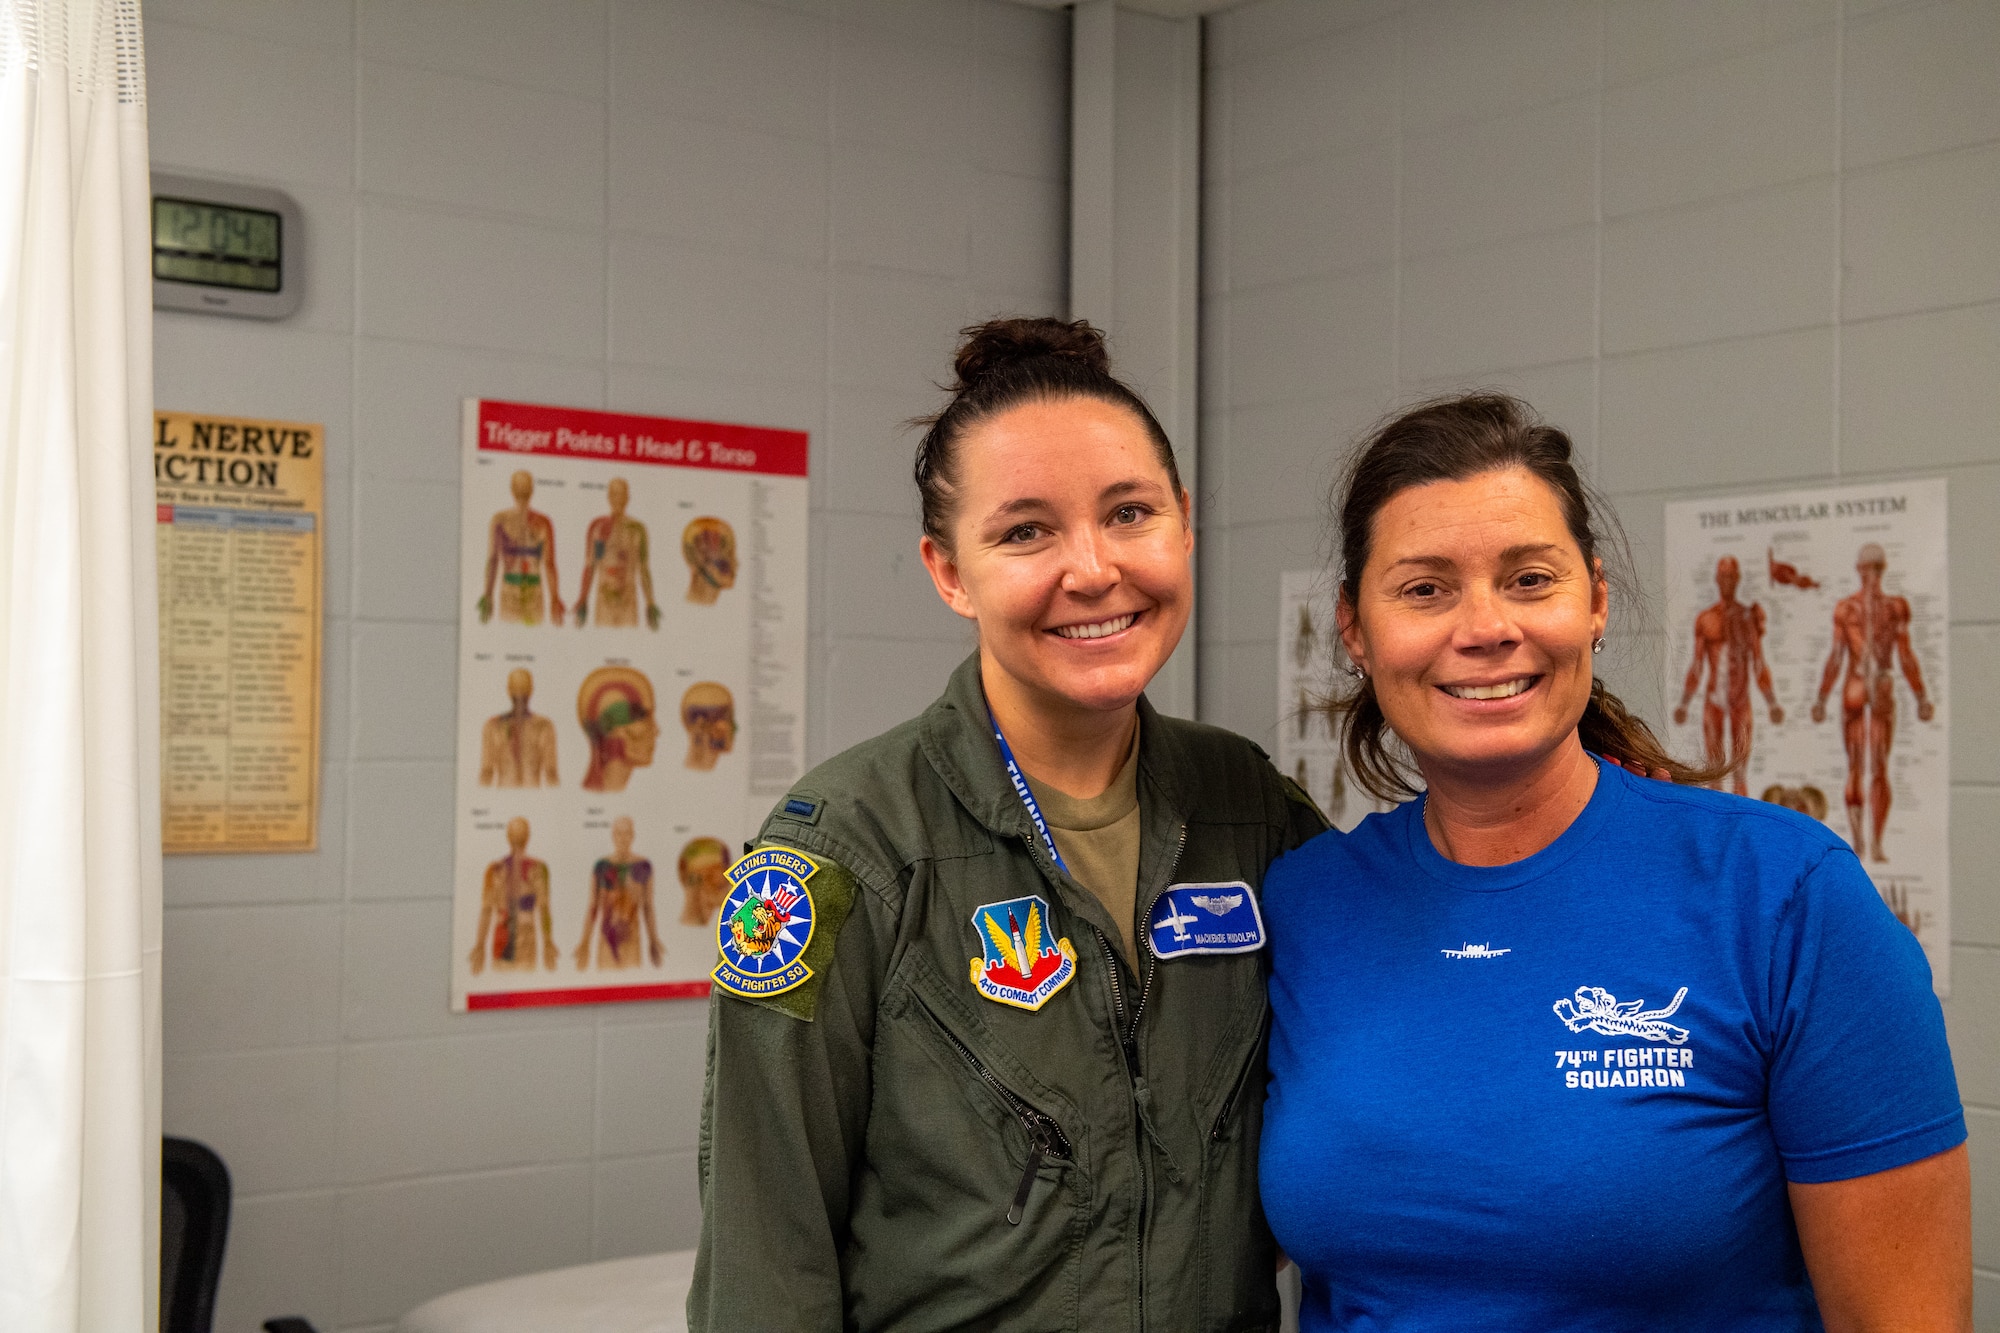 U.S. Air Force 1st Lt. Mackenzie Rudolph, 74th Fighter Squadron A-10 Thunderbolt II pilot (left), poses for a photograph with Robi Boney, 23rd Fighter Group Aircrew Performance Center licensed massage therapist, after a pre-flight stretching session at Moody Air Force Base, Georgia, June 1, 2022. The 23rd FG Pilots participate in the Optimizing the Human Weapons System Program in an effort to prevent potential injuries associated with flight. (U.S. Air Force photo by Airman 1st Class Courtney Sebastianelli)